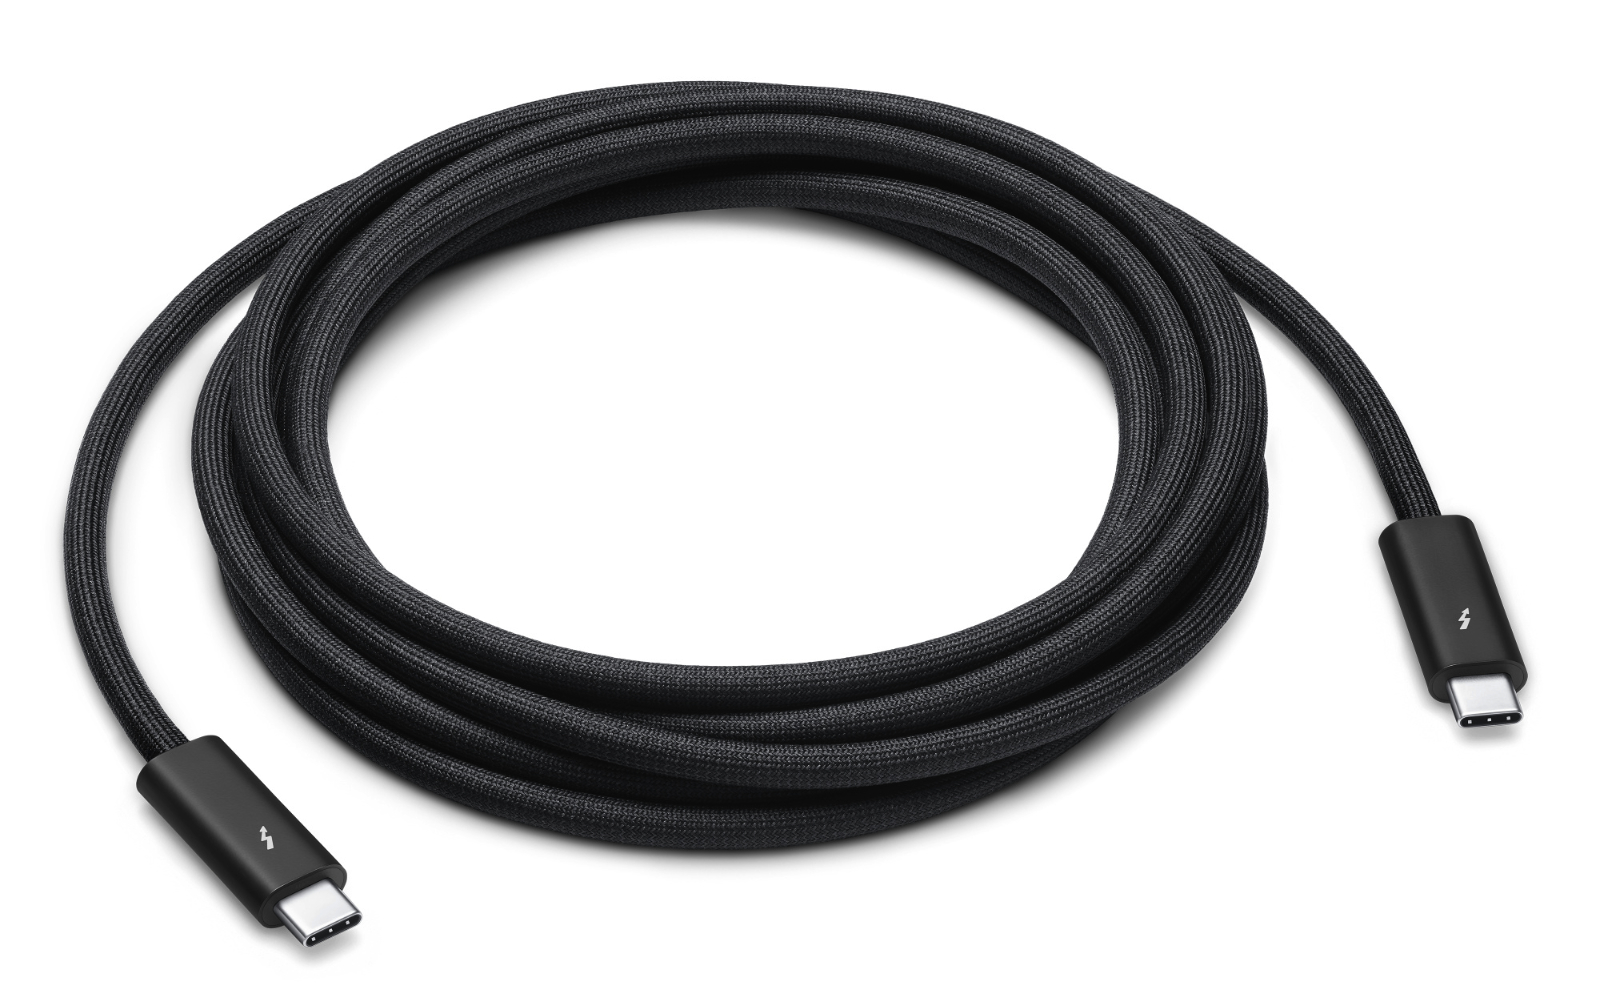 Apple Thunderbolt4 3meter cable